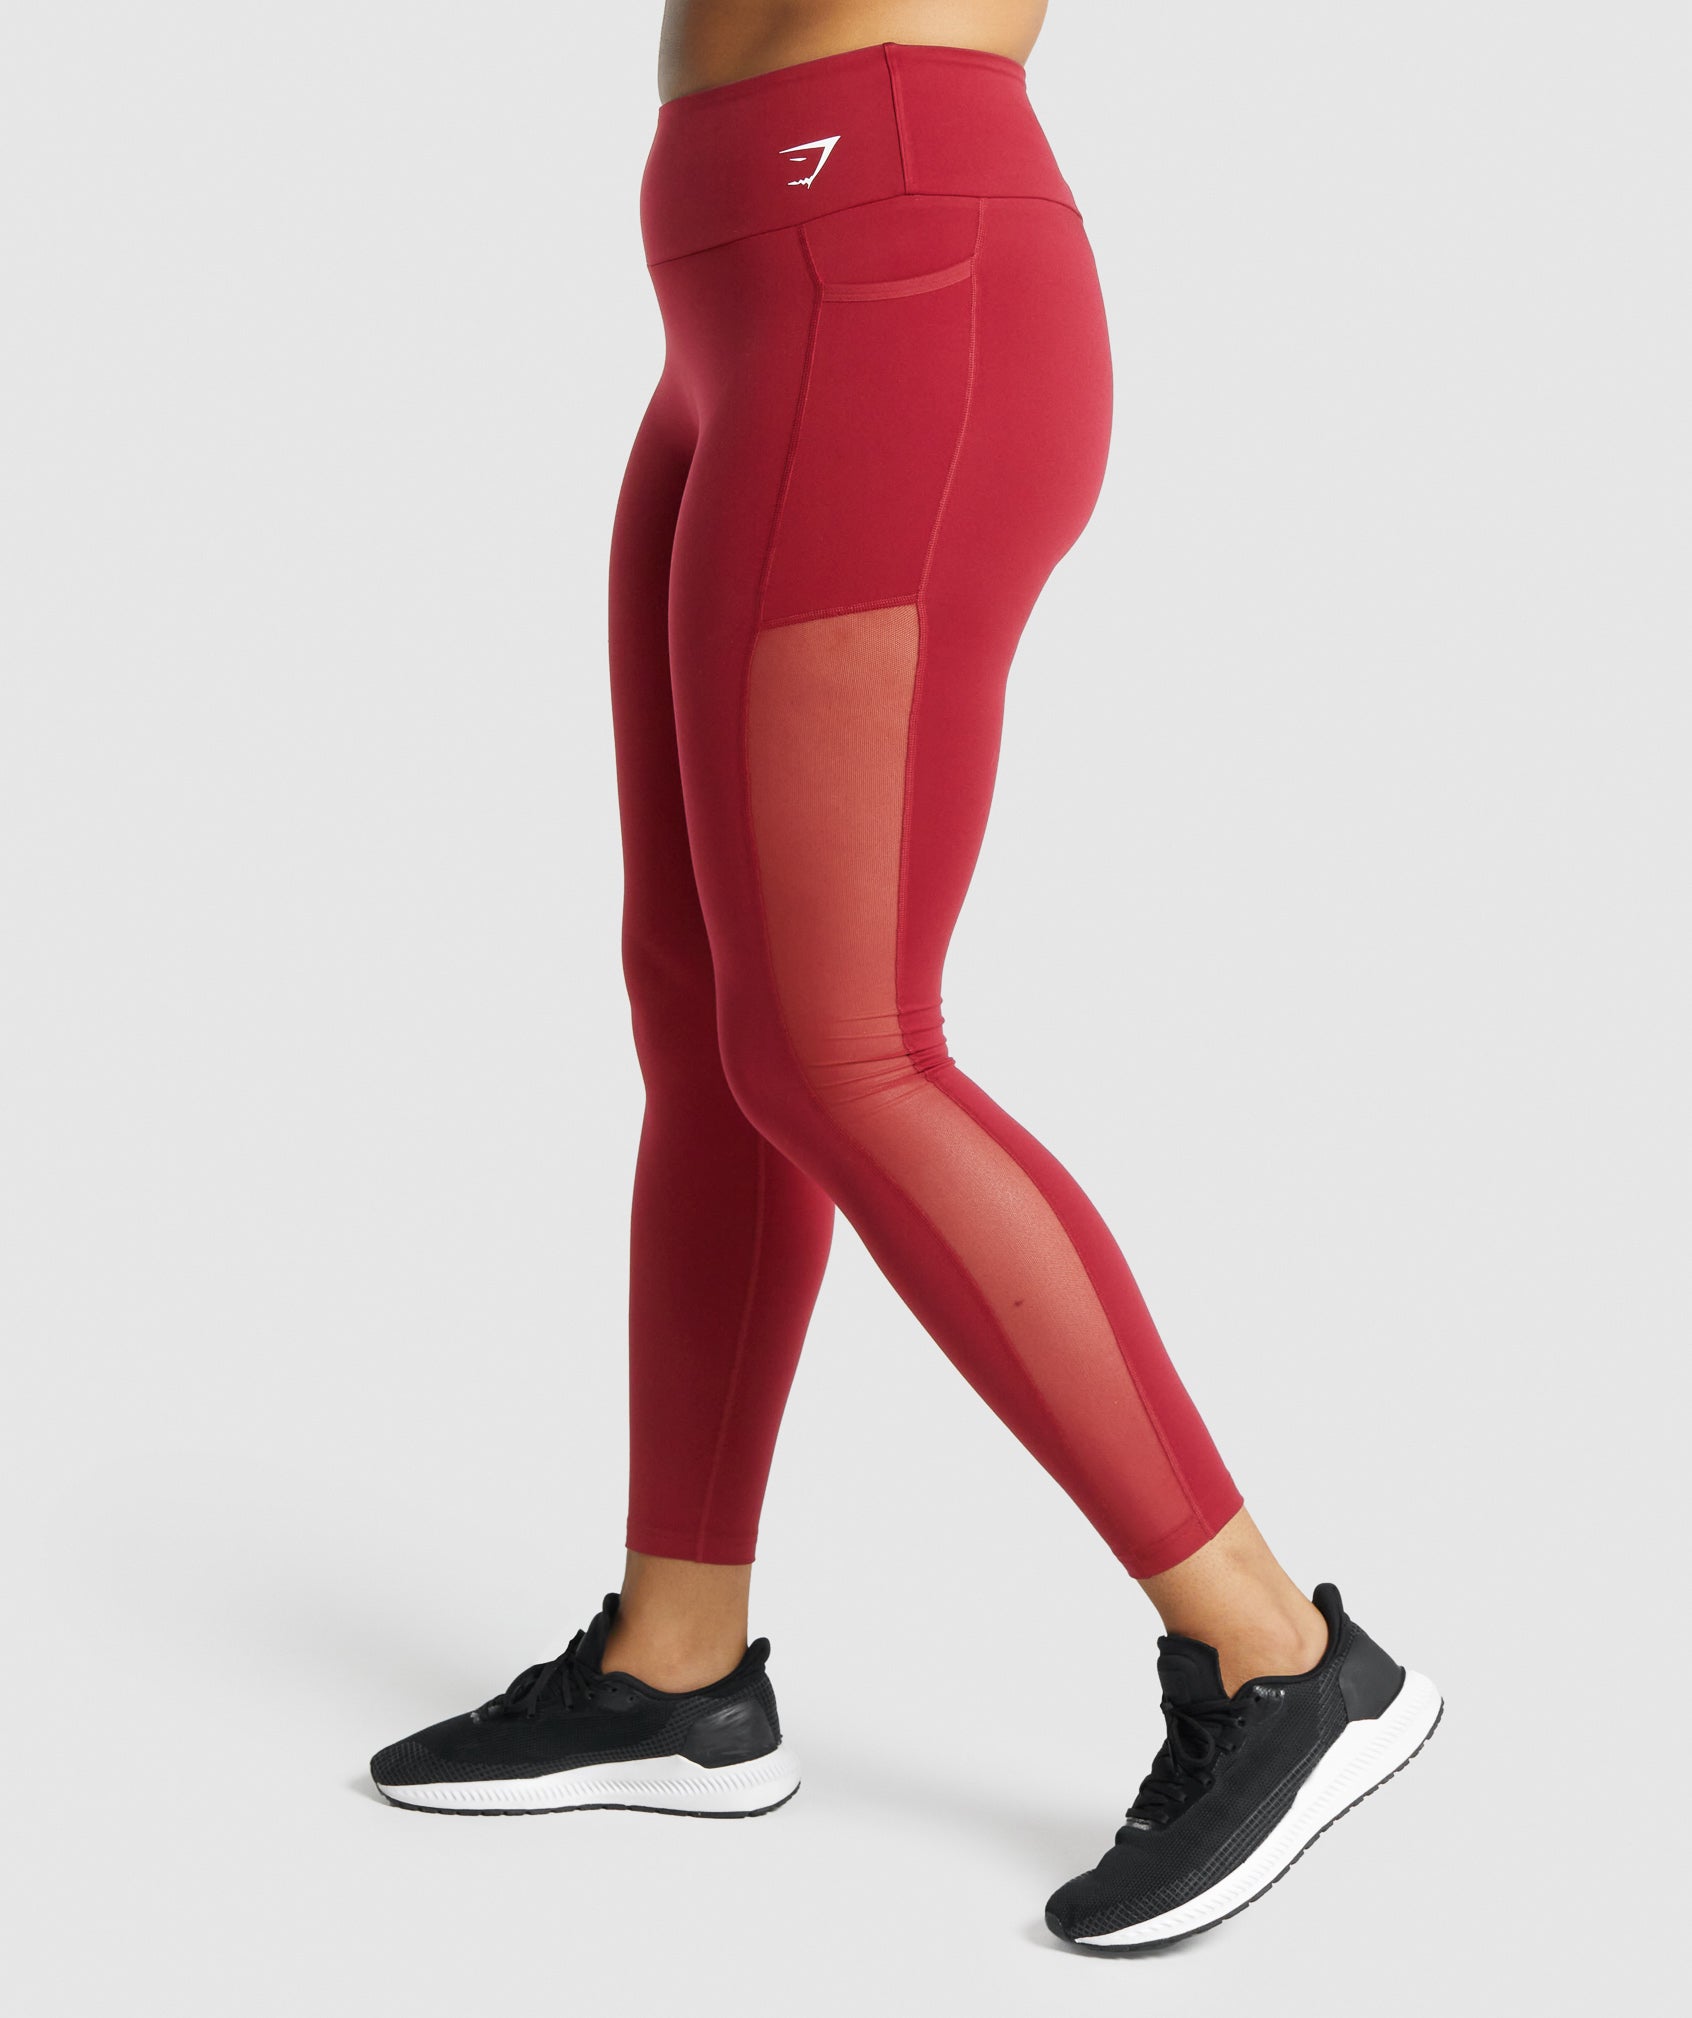 3 for $49! Maroon Red Cassi Mesh & Pockets Workout Leggings